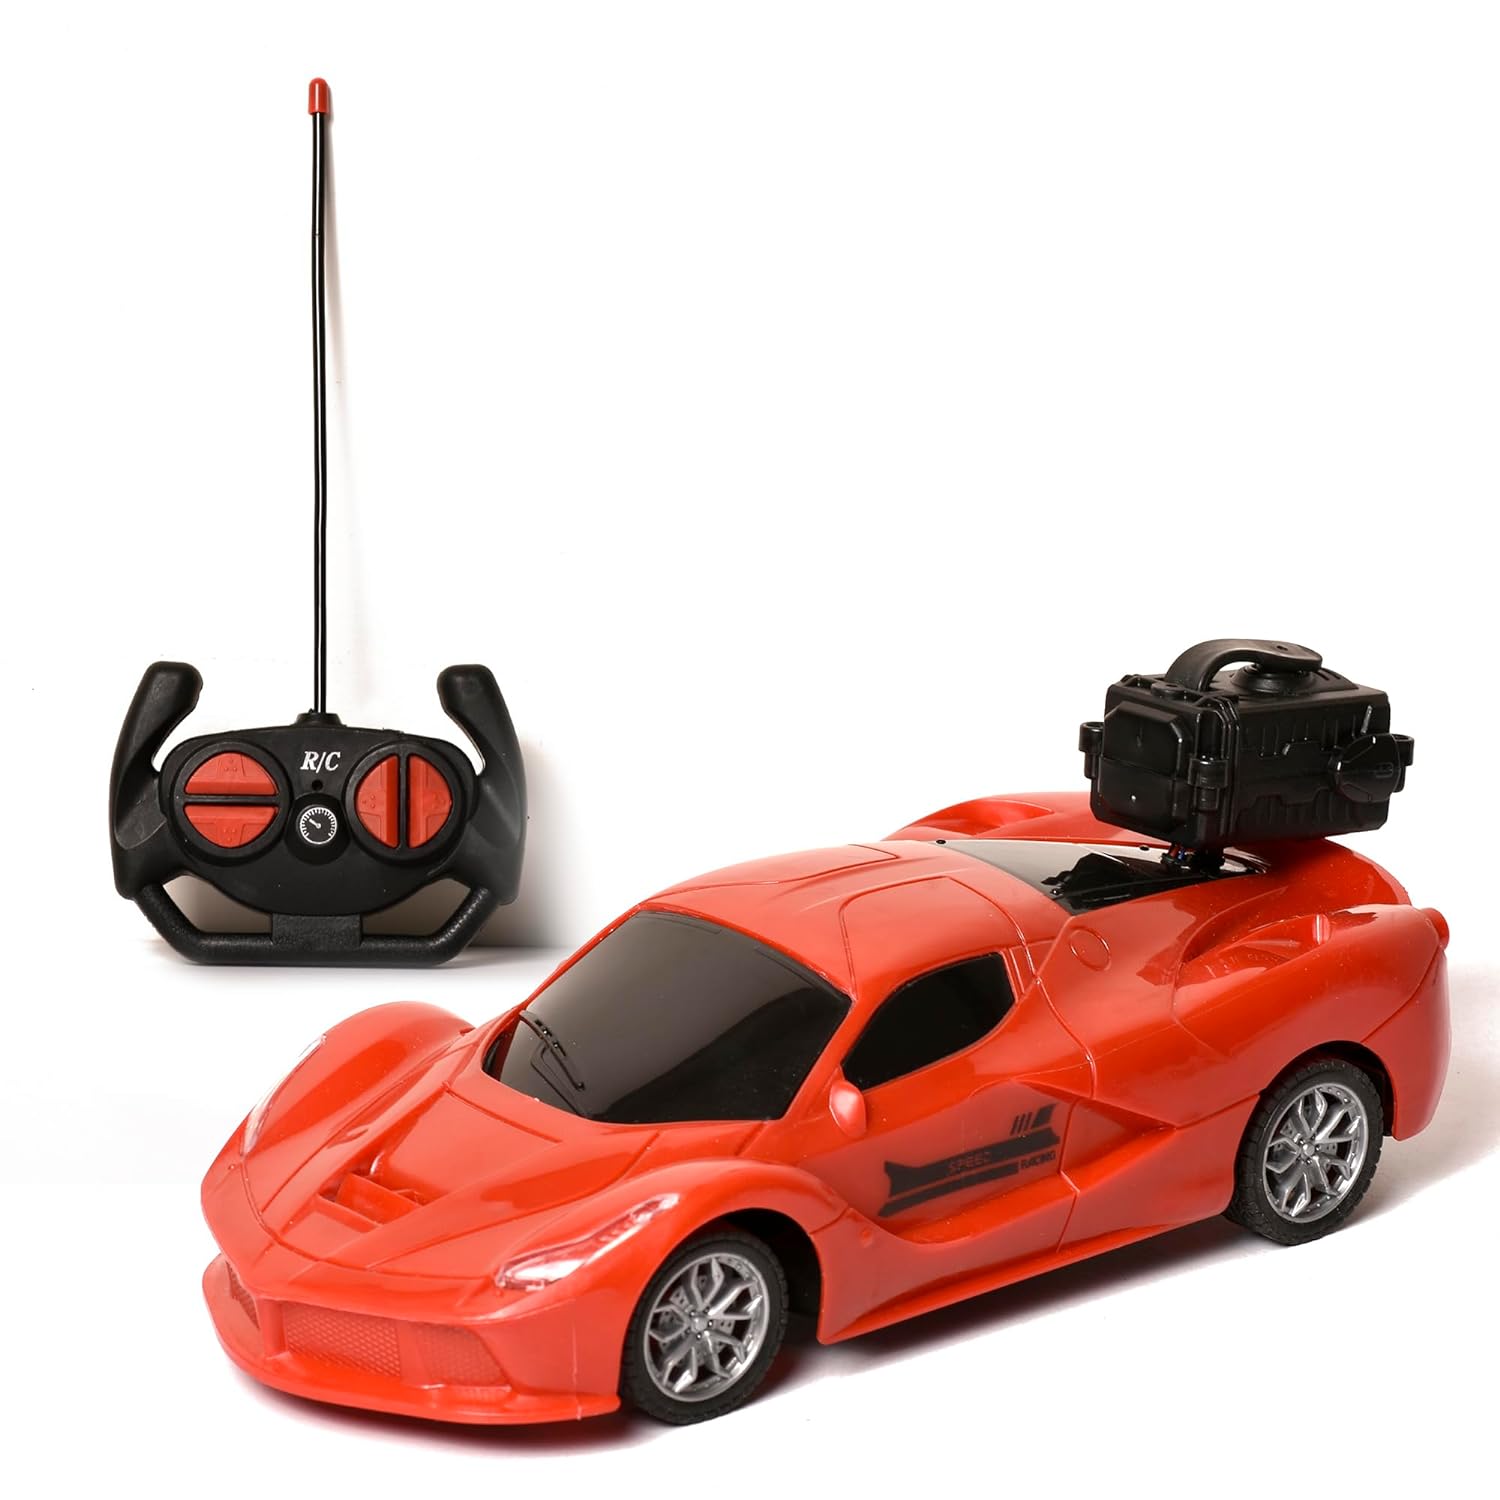 Braintastic Model Diecast Car Toy Vehicle Pull Back Friction Car with Openable Doors Light & Music Toys for Kids Age 3+ Years (Spray Car Red)